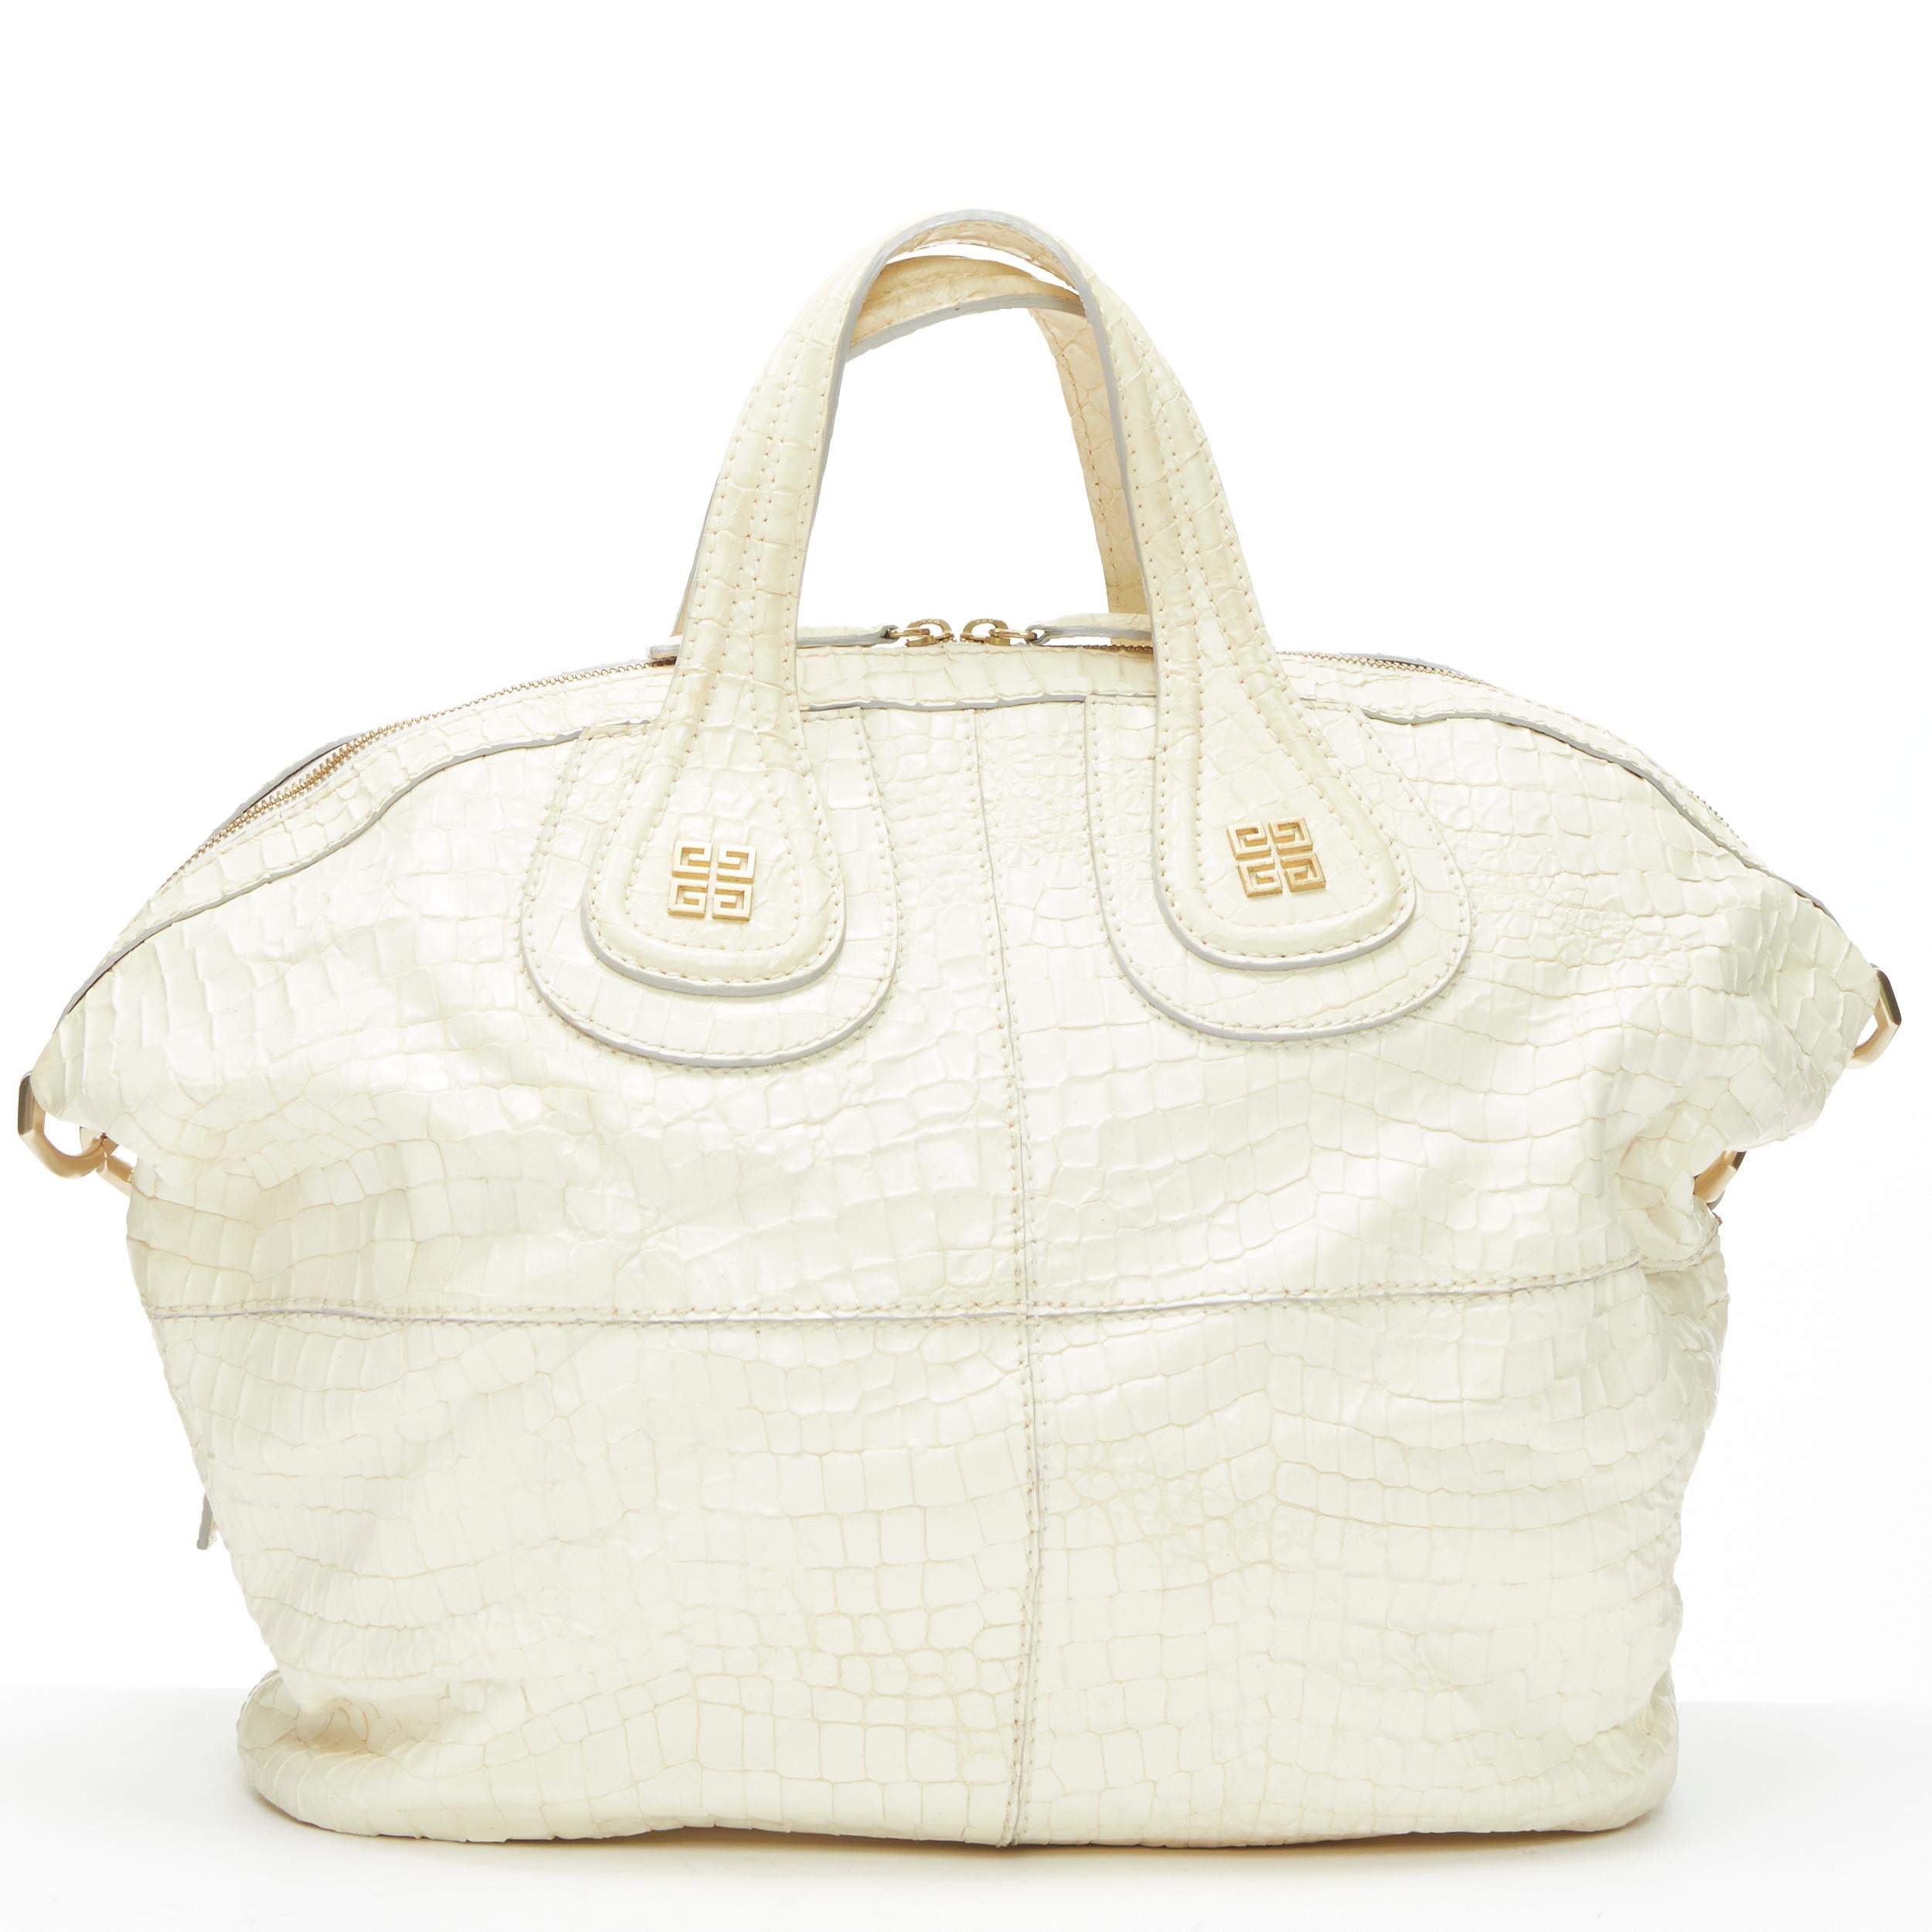 White GIVENCHY Nightingale cream white embossed leather shoulder hobo tote bag